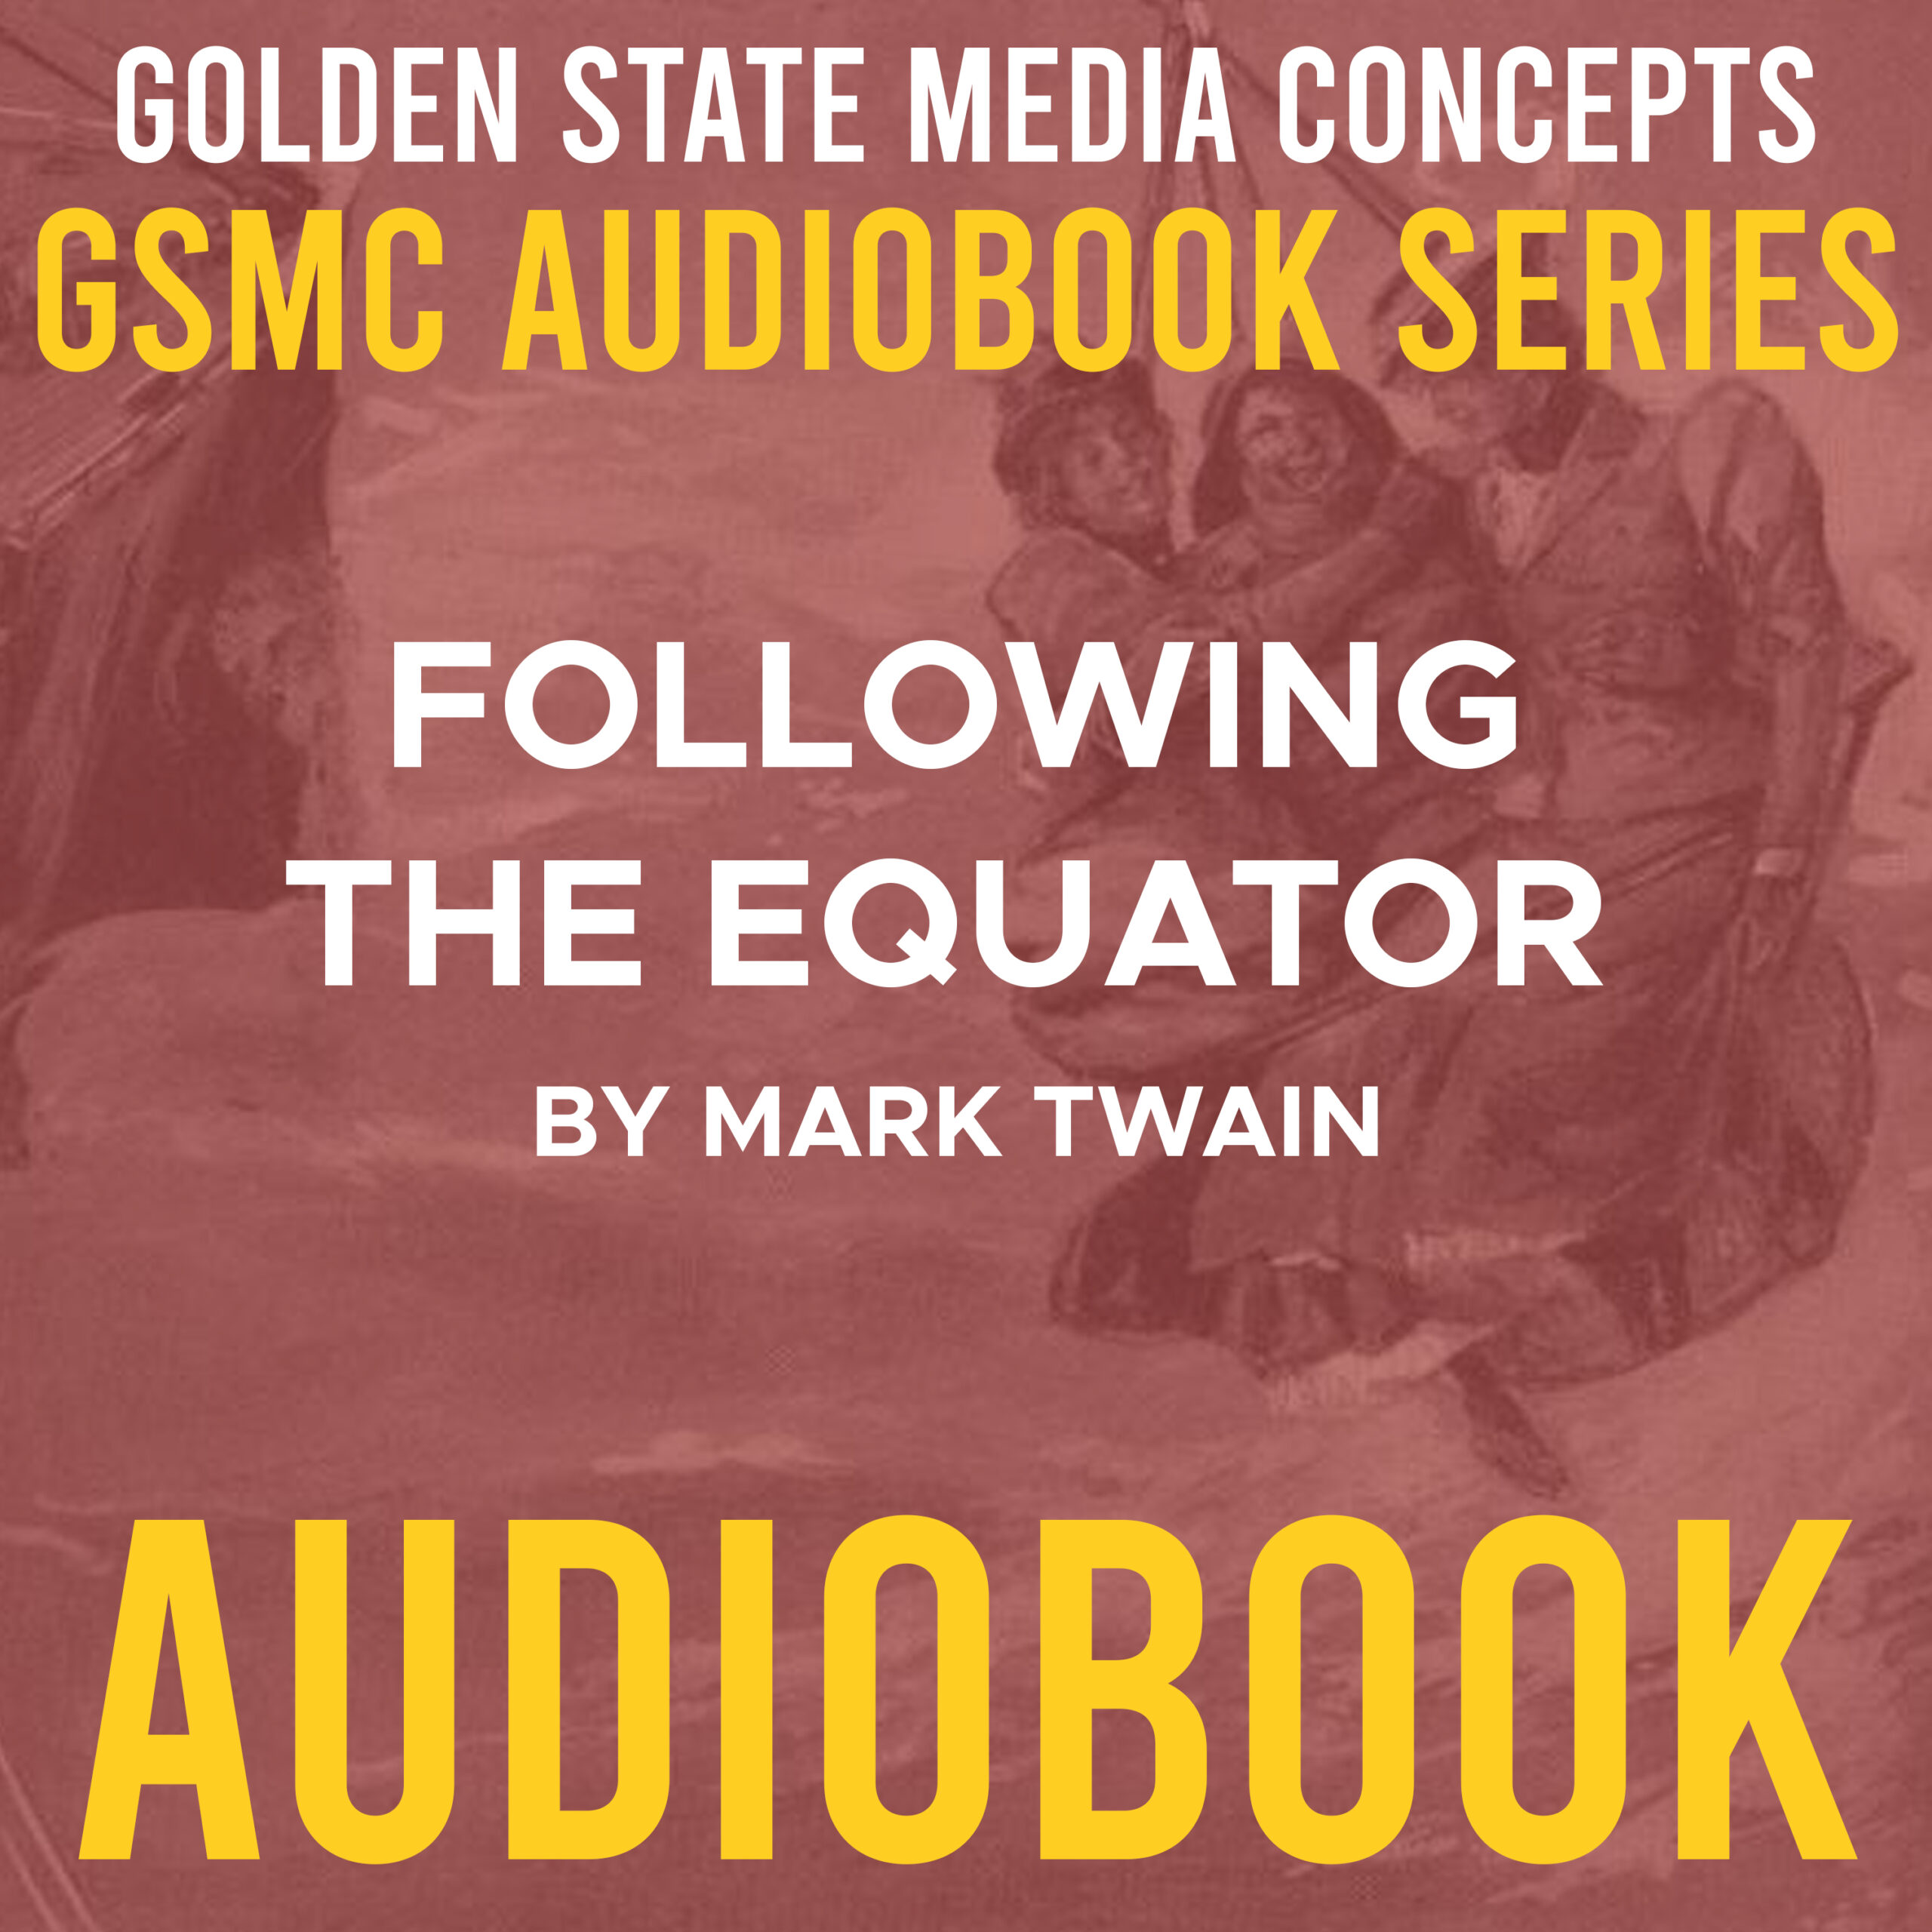 GSMC Audiobook Series: Following the Equator by Mark Twain